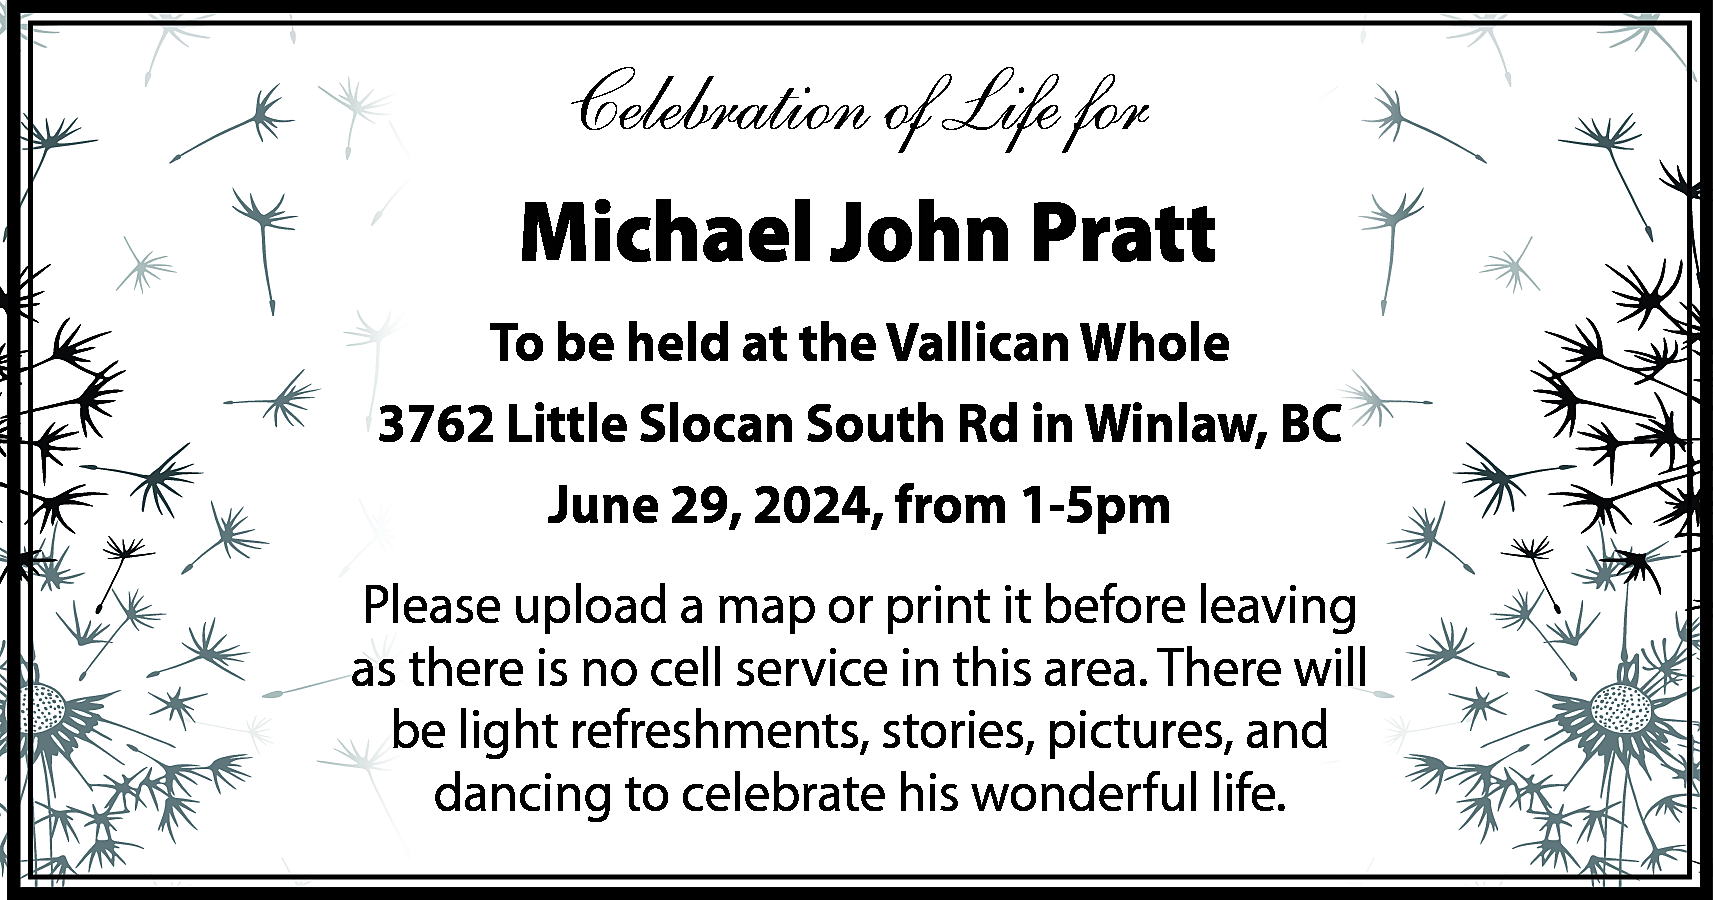 Celebration of Life for <br>Michael  Celebration of Life for  Michael John Pratt  To be held at the Vallican Whole  3762 Little Slocan South Rd in Winlaw, BC  June 29, 2024, from 1-5pm  Please upload a map or print it before leaving  as there is no cell service in this area. There will  be light refreshments, stories, pictures, and  dancing to celebrate his wonderful life.    